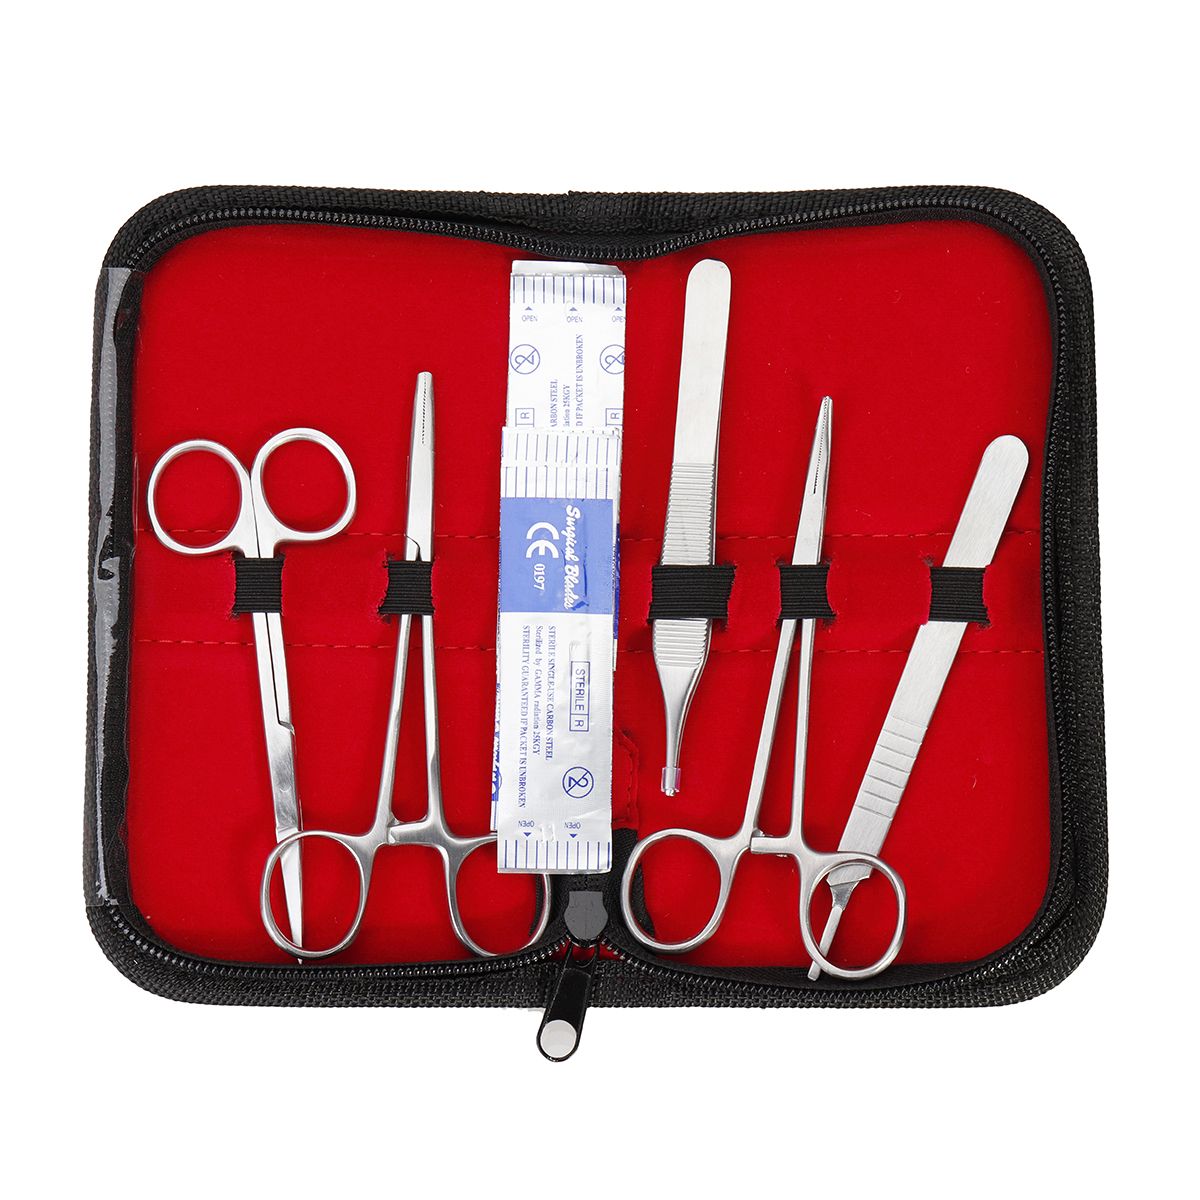 Stainless-Steel-Hemostatic-Artery-Locking-Clamp-Surgical-Forceps-Tweezers-with-Blade-Tools-Kit-1416398